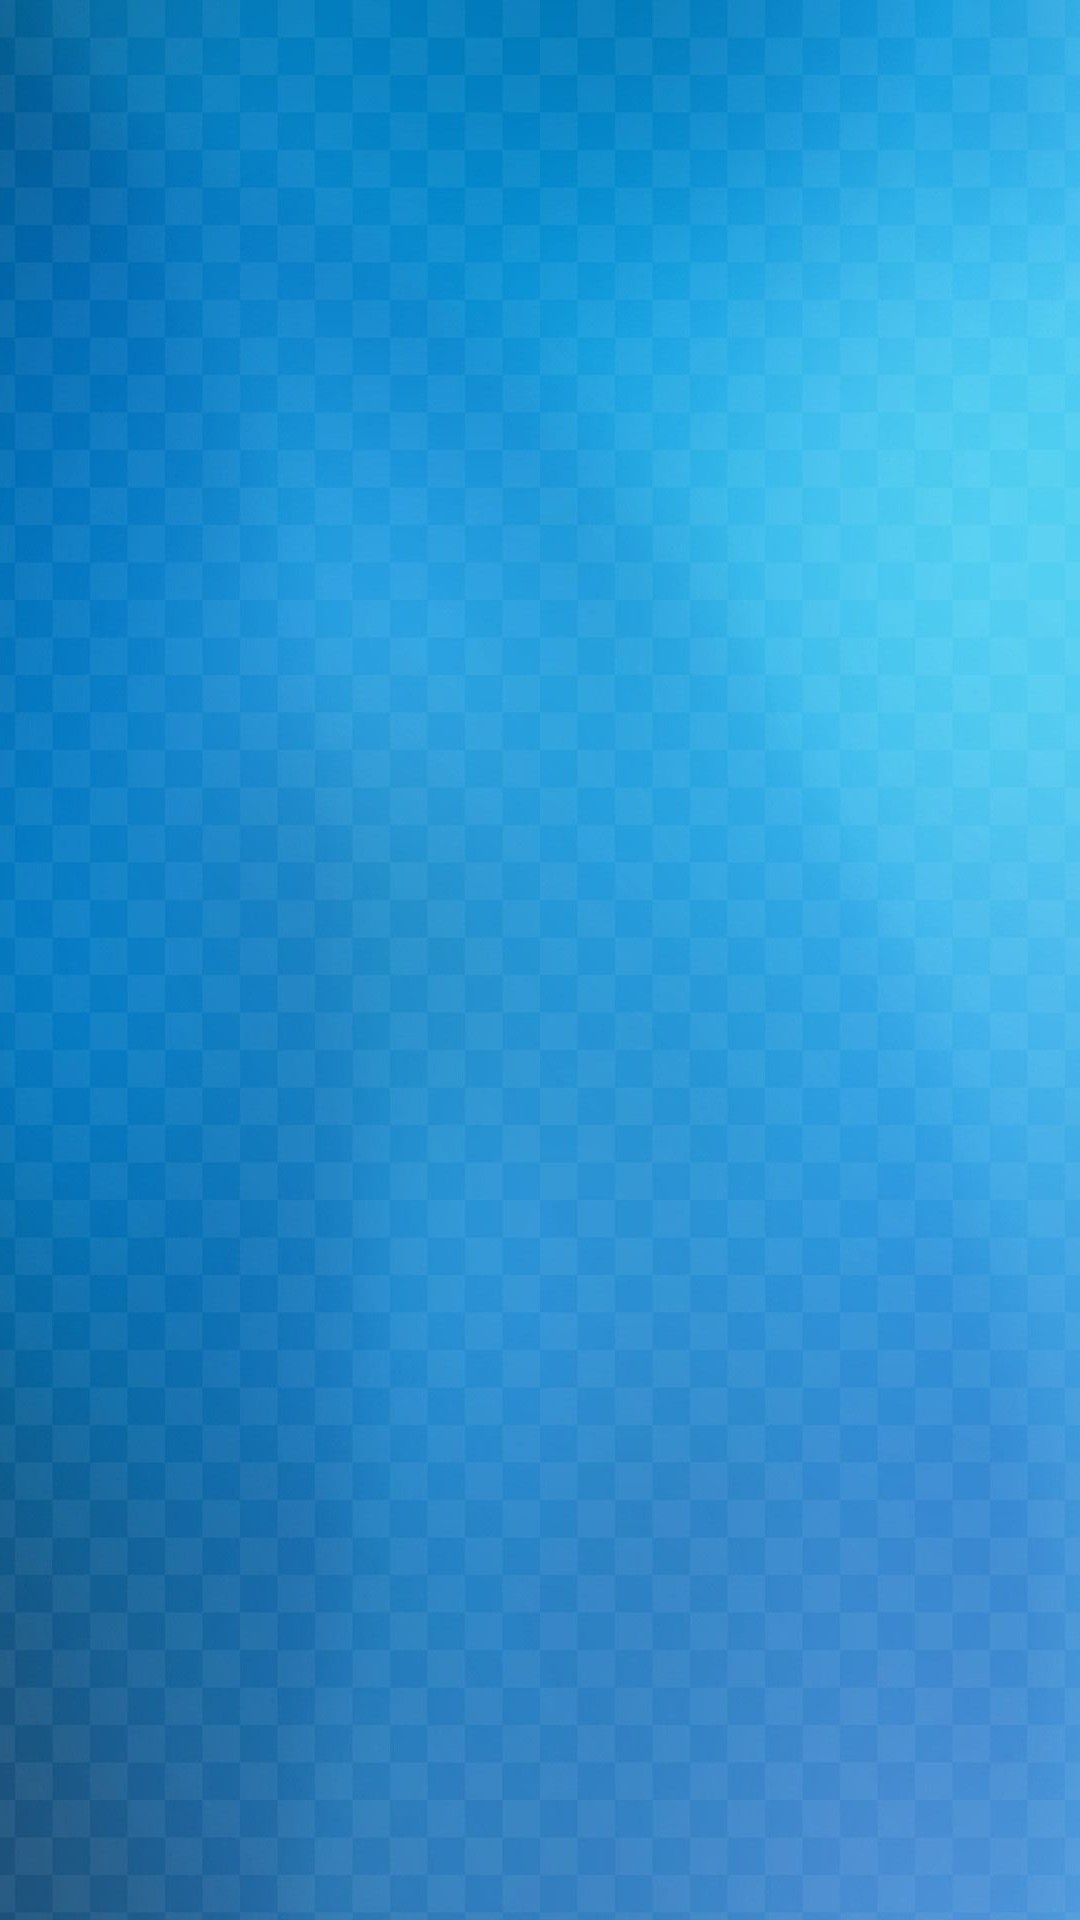 Blue Wallpaper Hd For Iphone 6 Resolution - Parallel - HD Wallpaper 